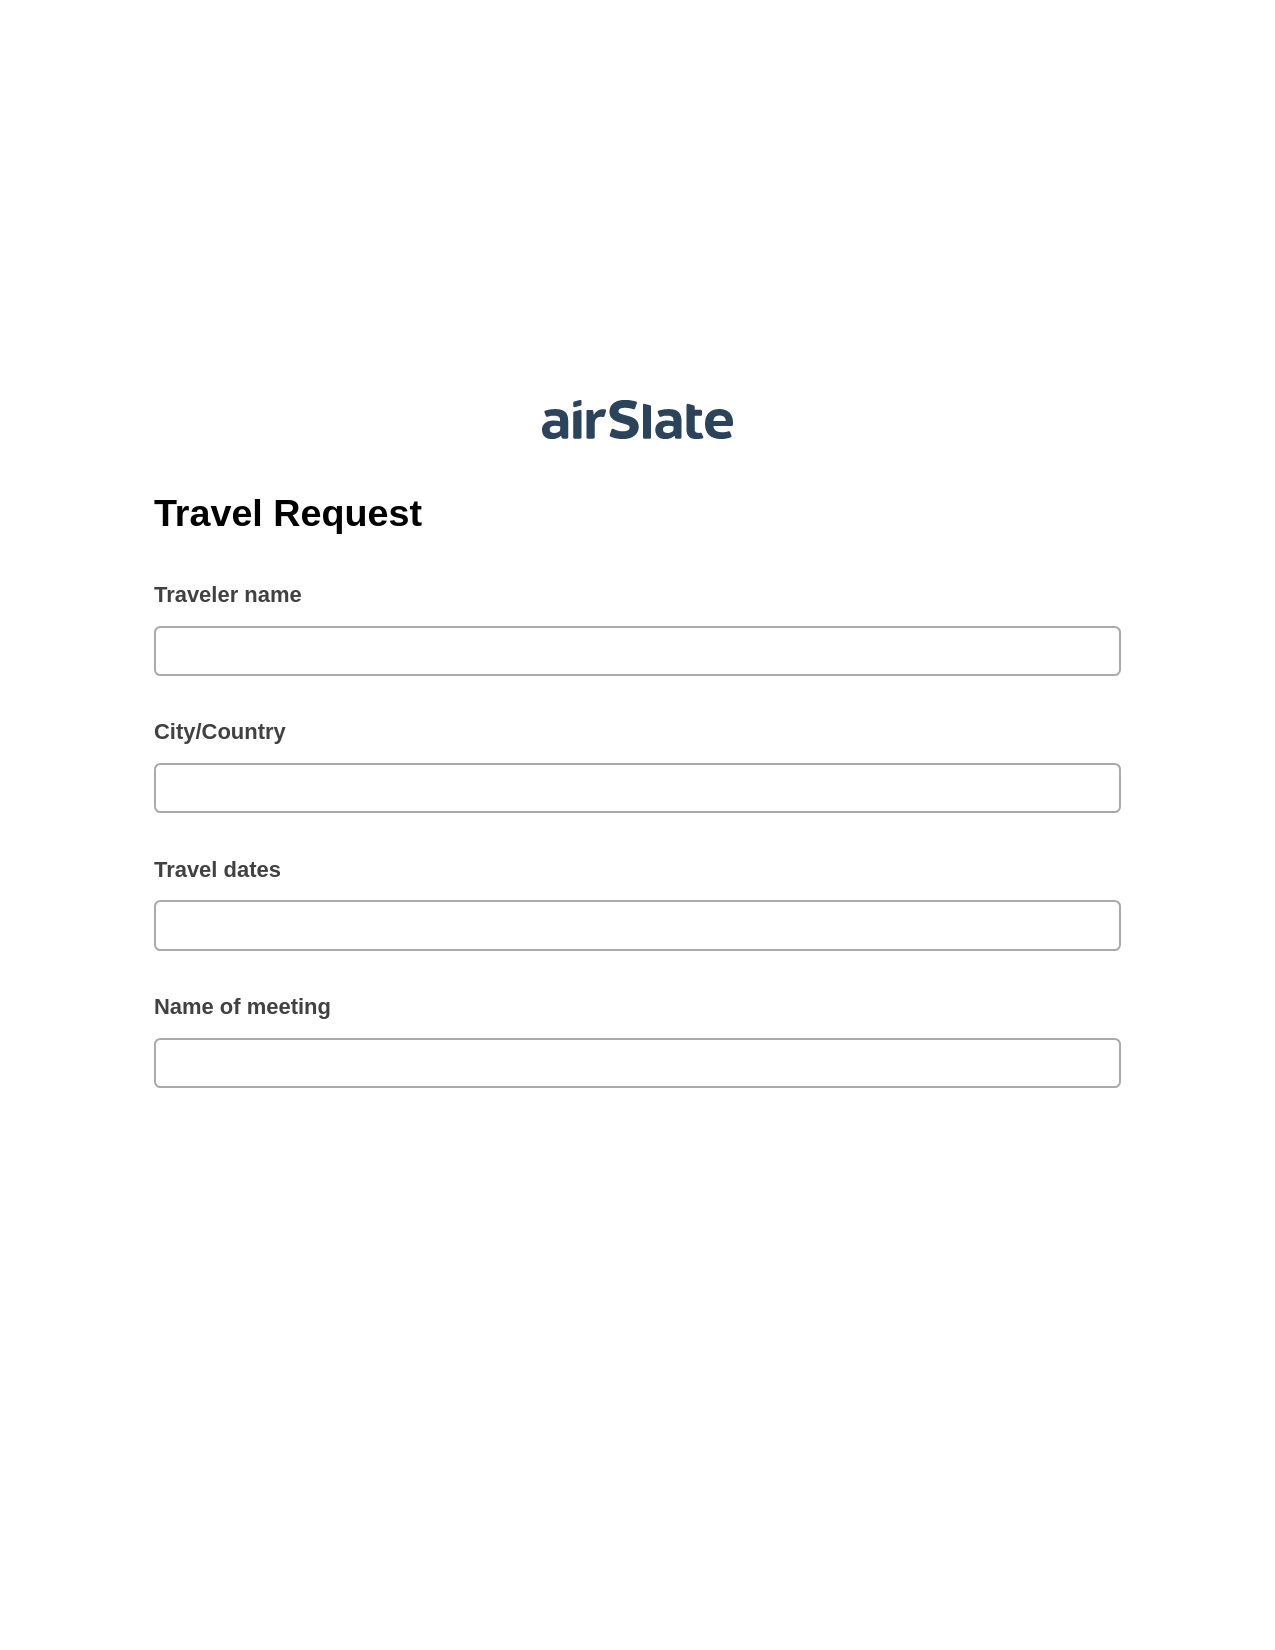 Travel Request Pre-fill Dropdown from Airtable, Create QuickBooks invoice Bot, Export to NetSuite Record Bot